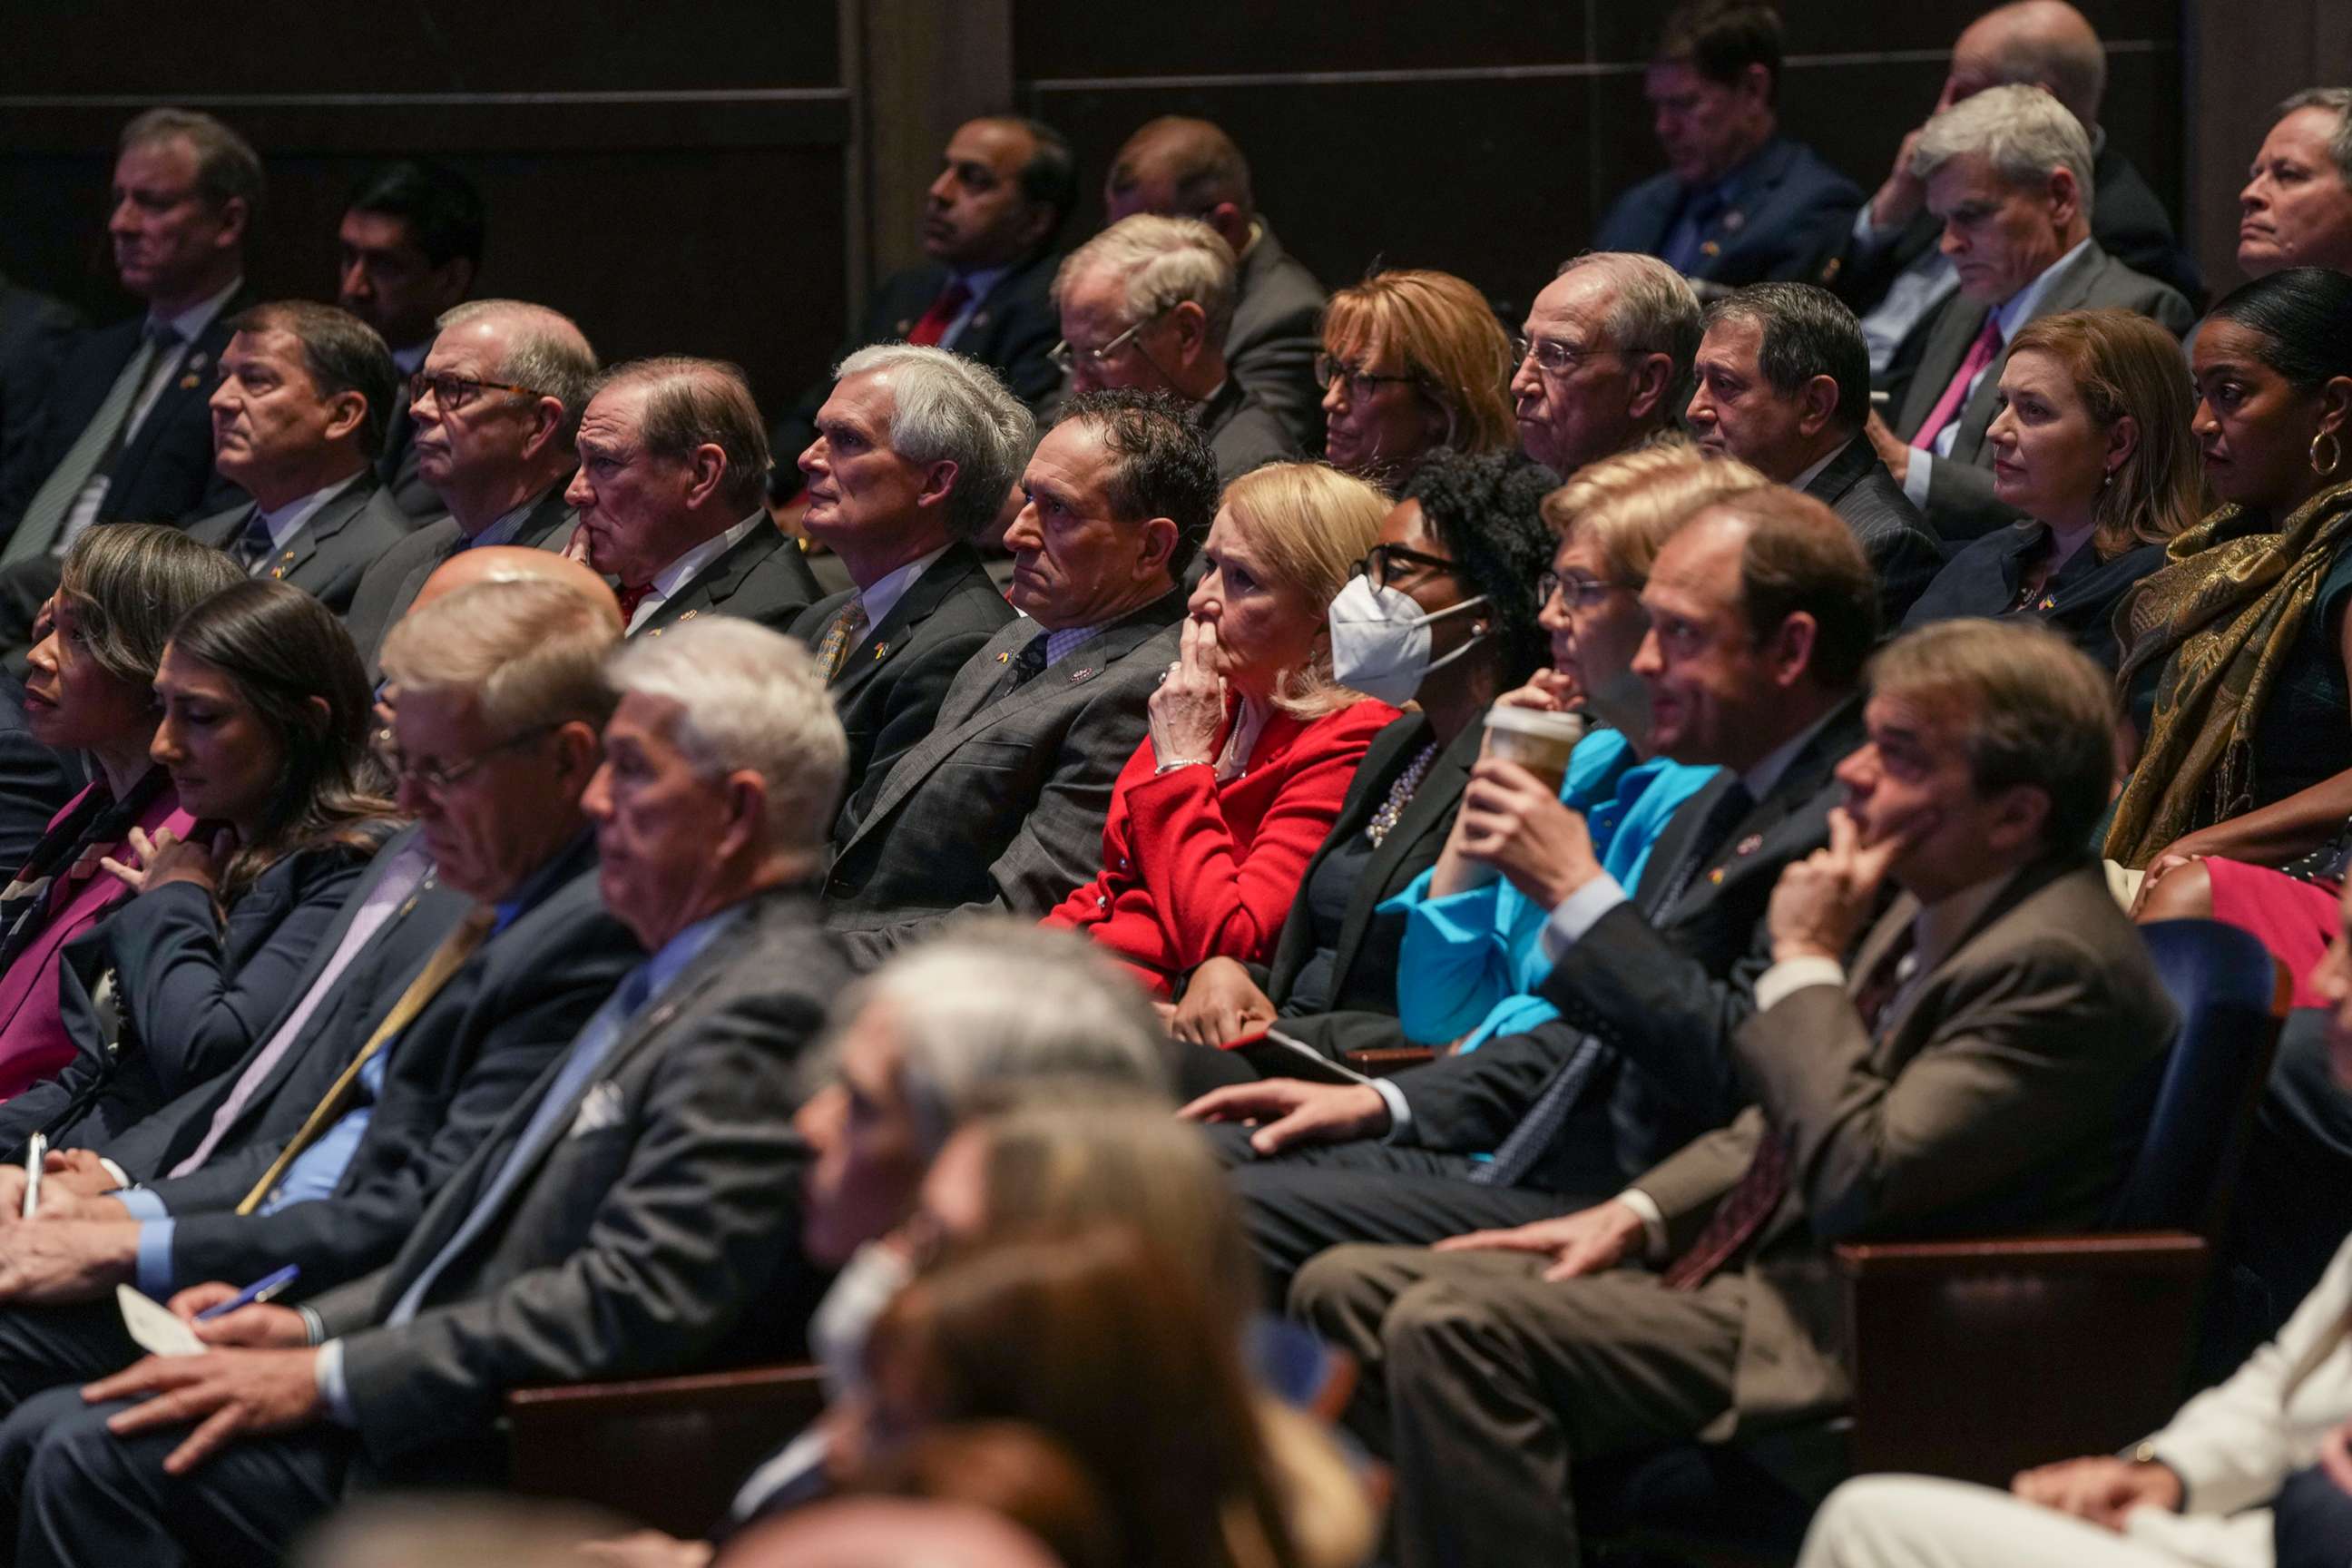 PHOTO: Members of Congress watch as President Volodymyr Zelensky of Ukraine delivers a virtual address to Congress in the U.S. Capitol Visitors Center Congressional Auditorium, March 16, 2022, in Washington, D.C.